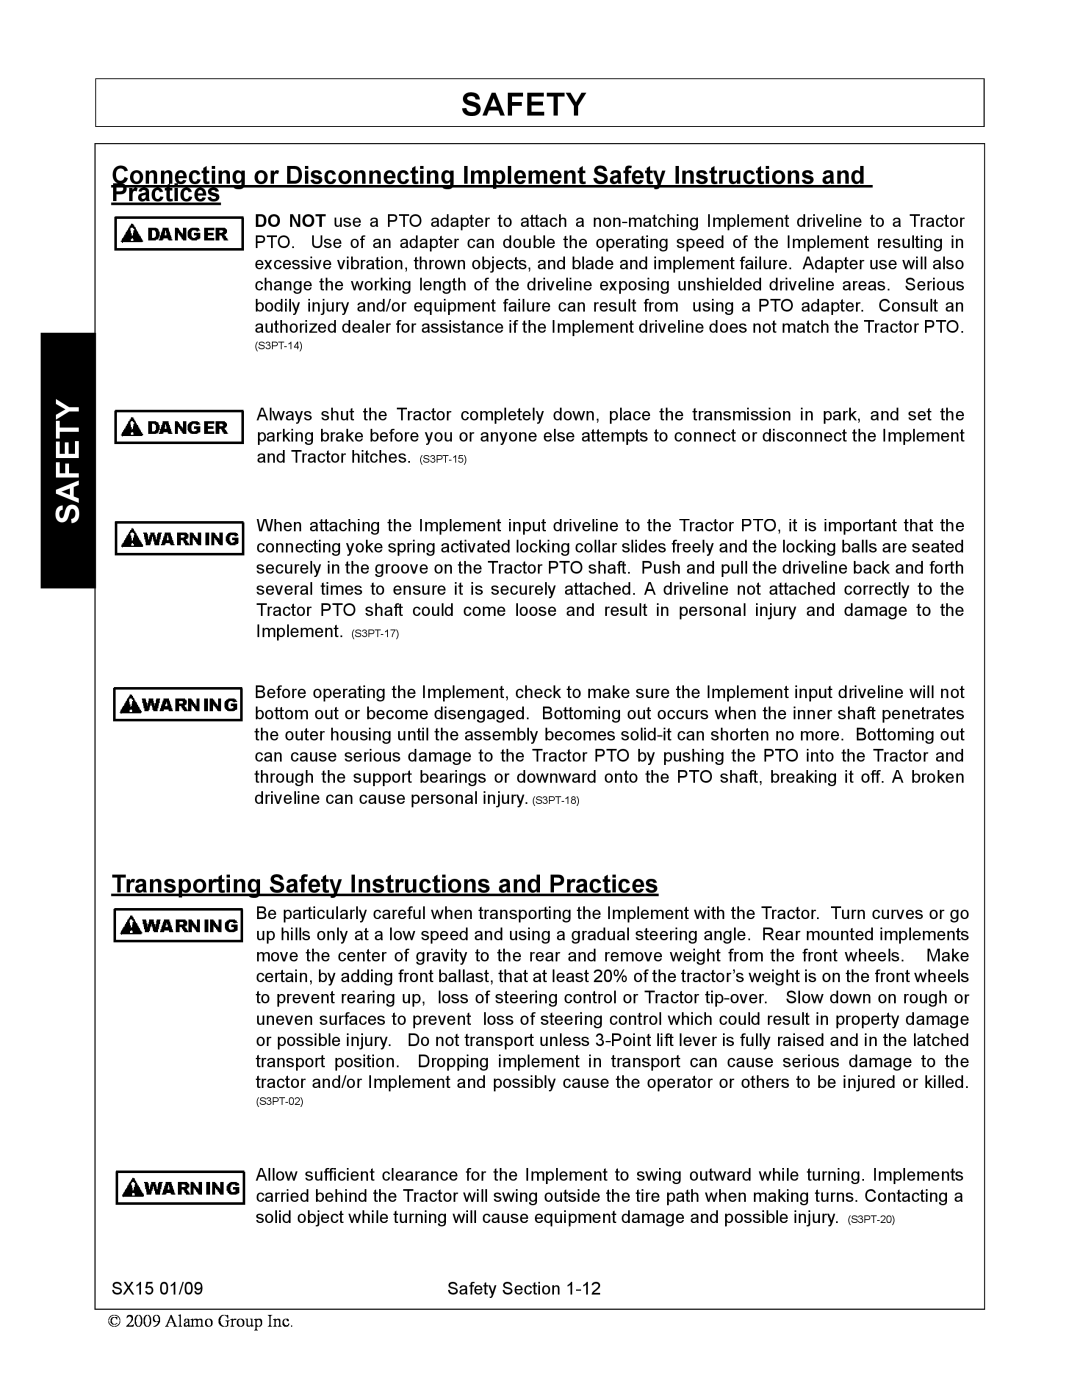 Alamo SX15 manual Transporting Safety Instructions and Practices, S3PT-14, S3PT-02 